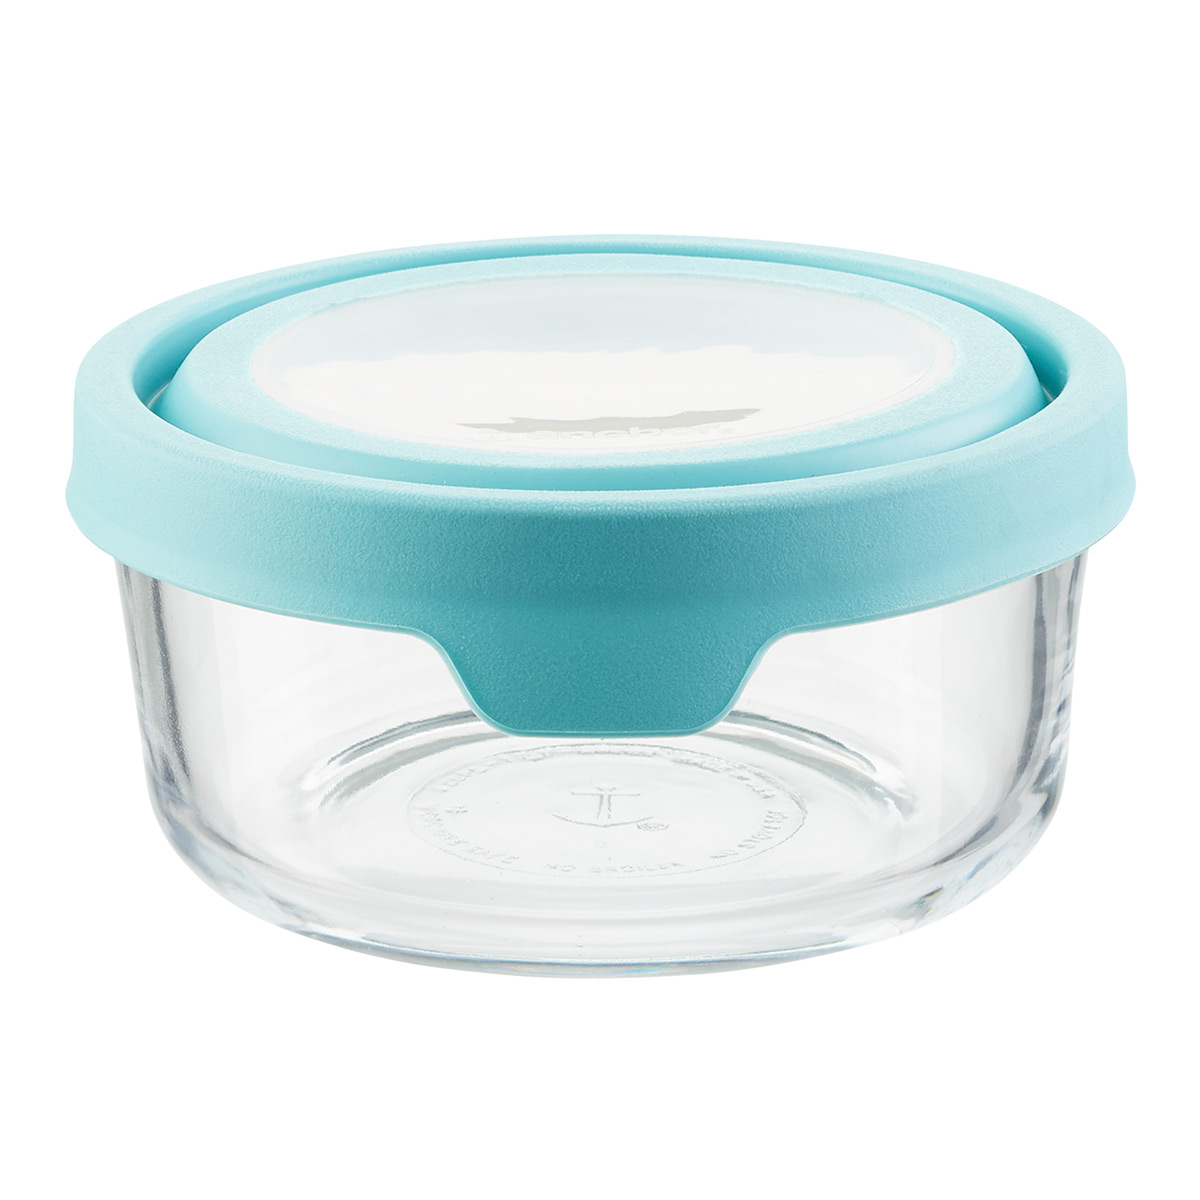 https://www.containerstore.com/catalogimages/351269/10076229-anchor-trueseal-container-r.jpg